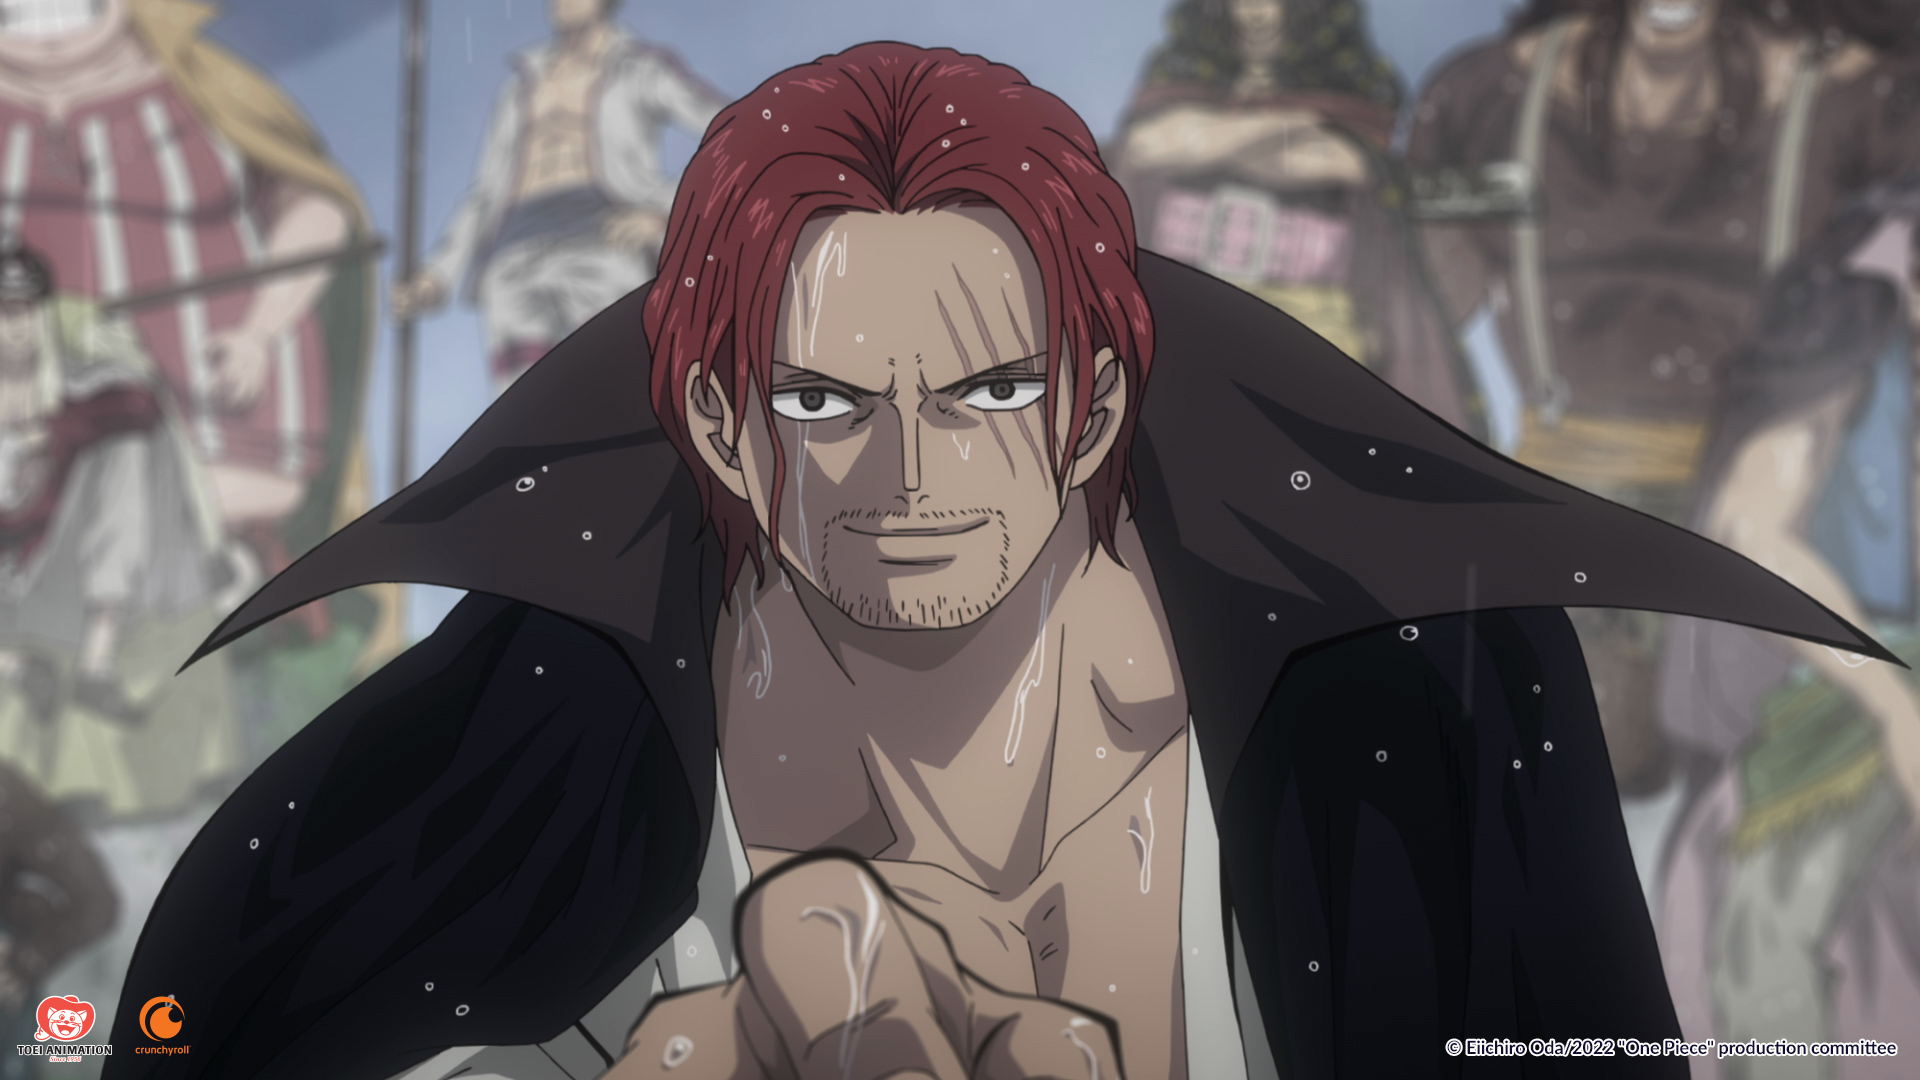 #”One Piece: Red” is coming to German cinemas!